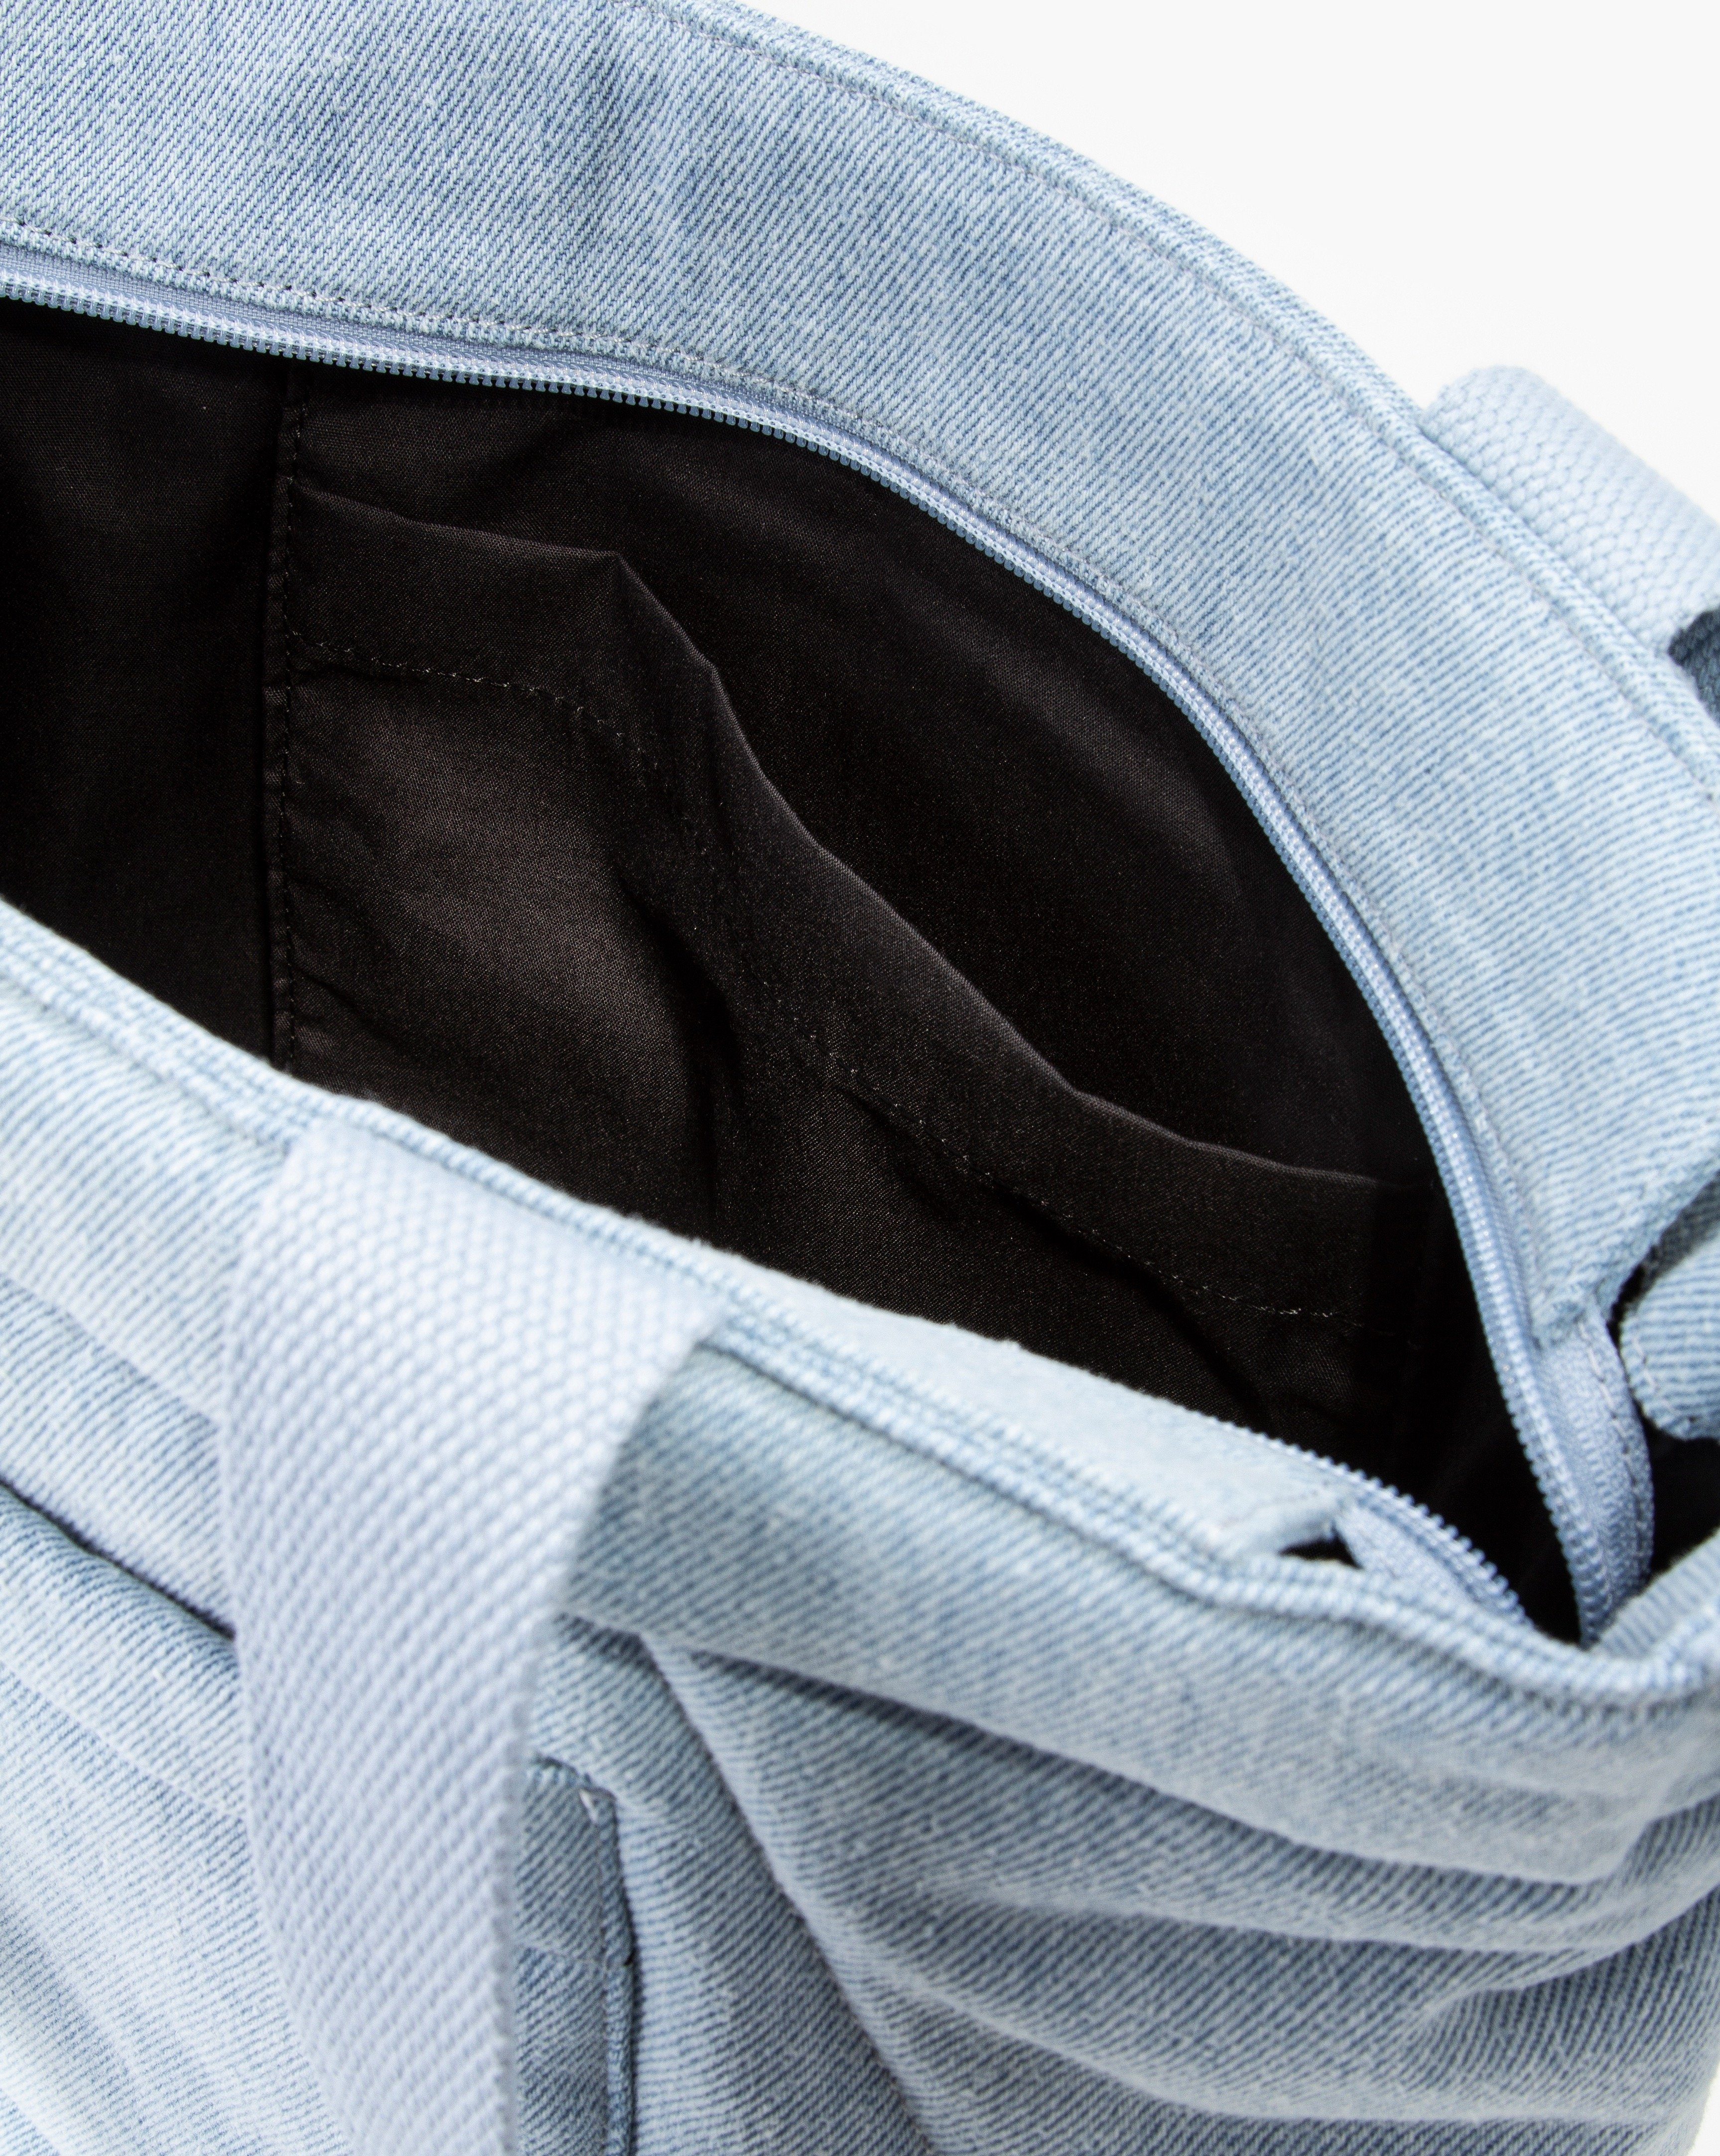 HOLIDAY, Jeans im Levi's® Look modischem ICON - TOTE Shopper